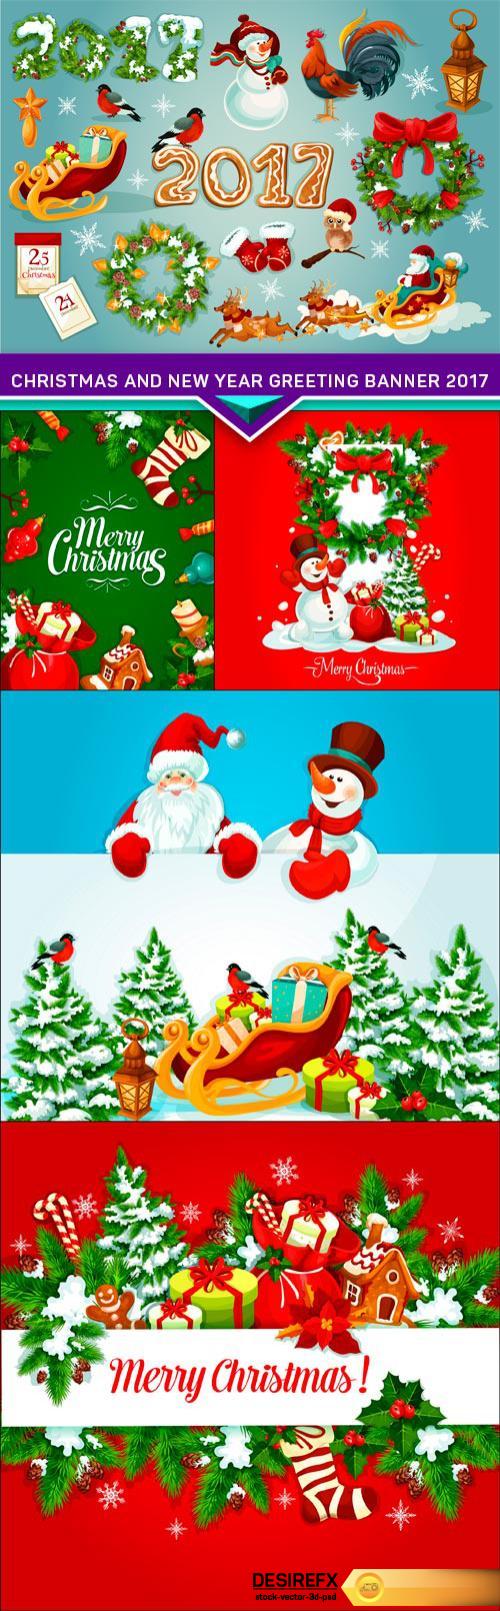 Christmas and New Year greeting banner 2017 #2 5X EPS